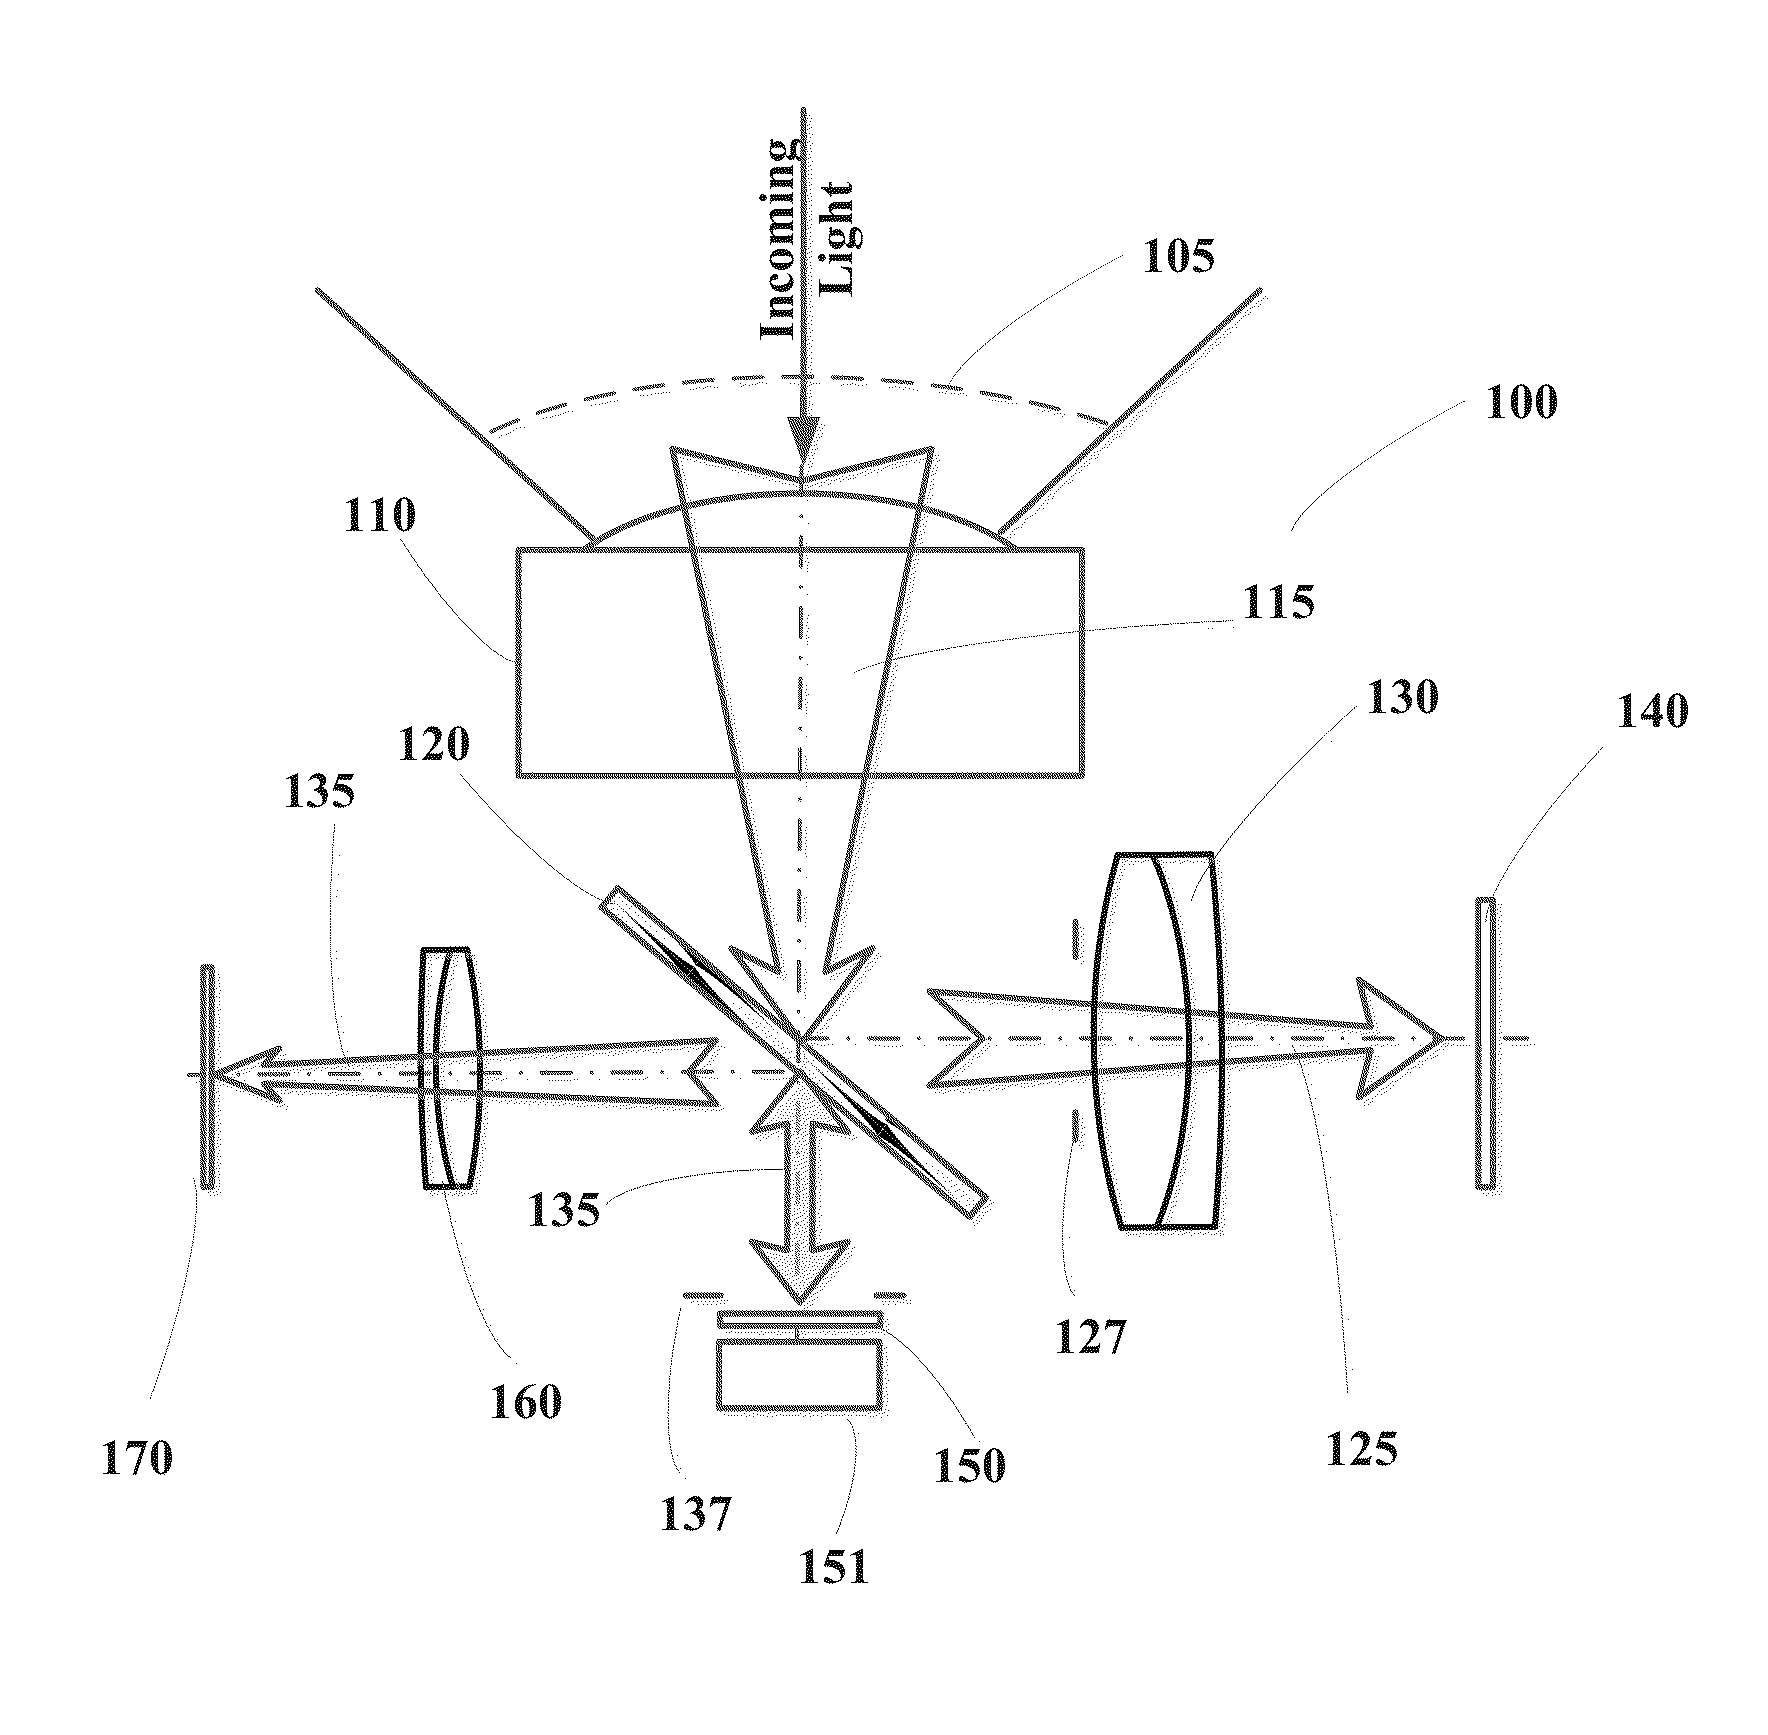 Wide-field of view (FOV) imaging devices with active foveation capability